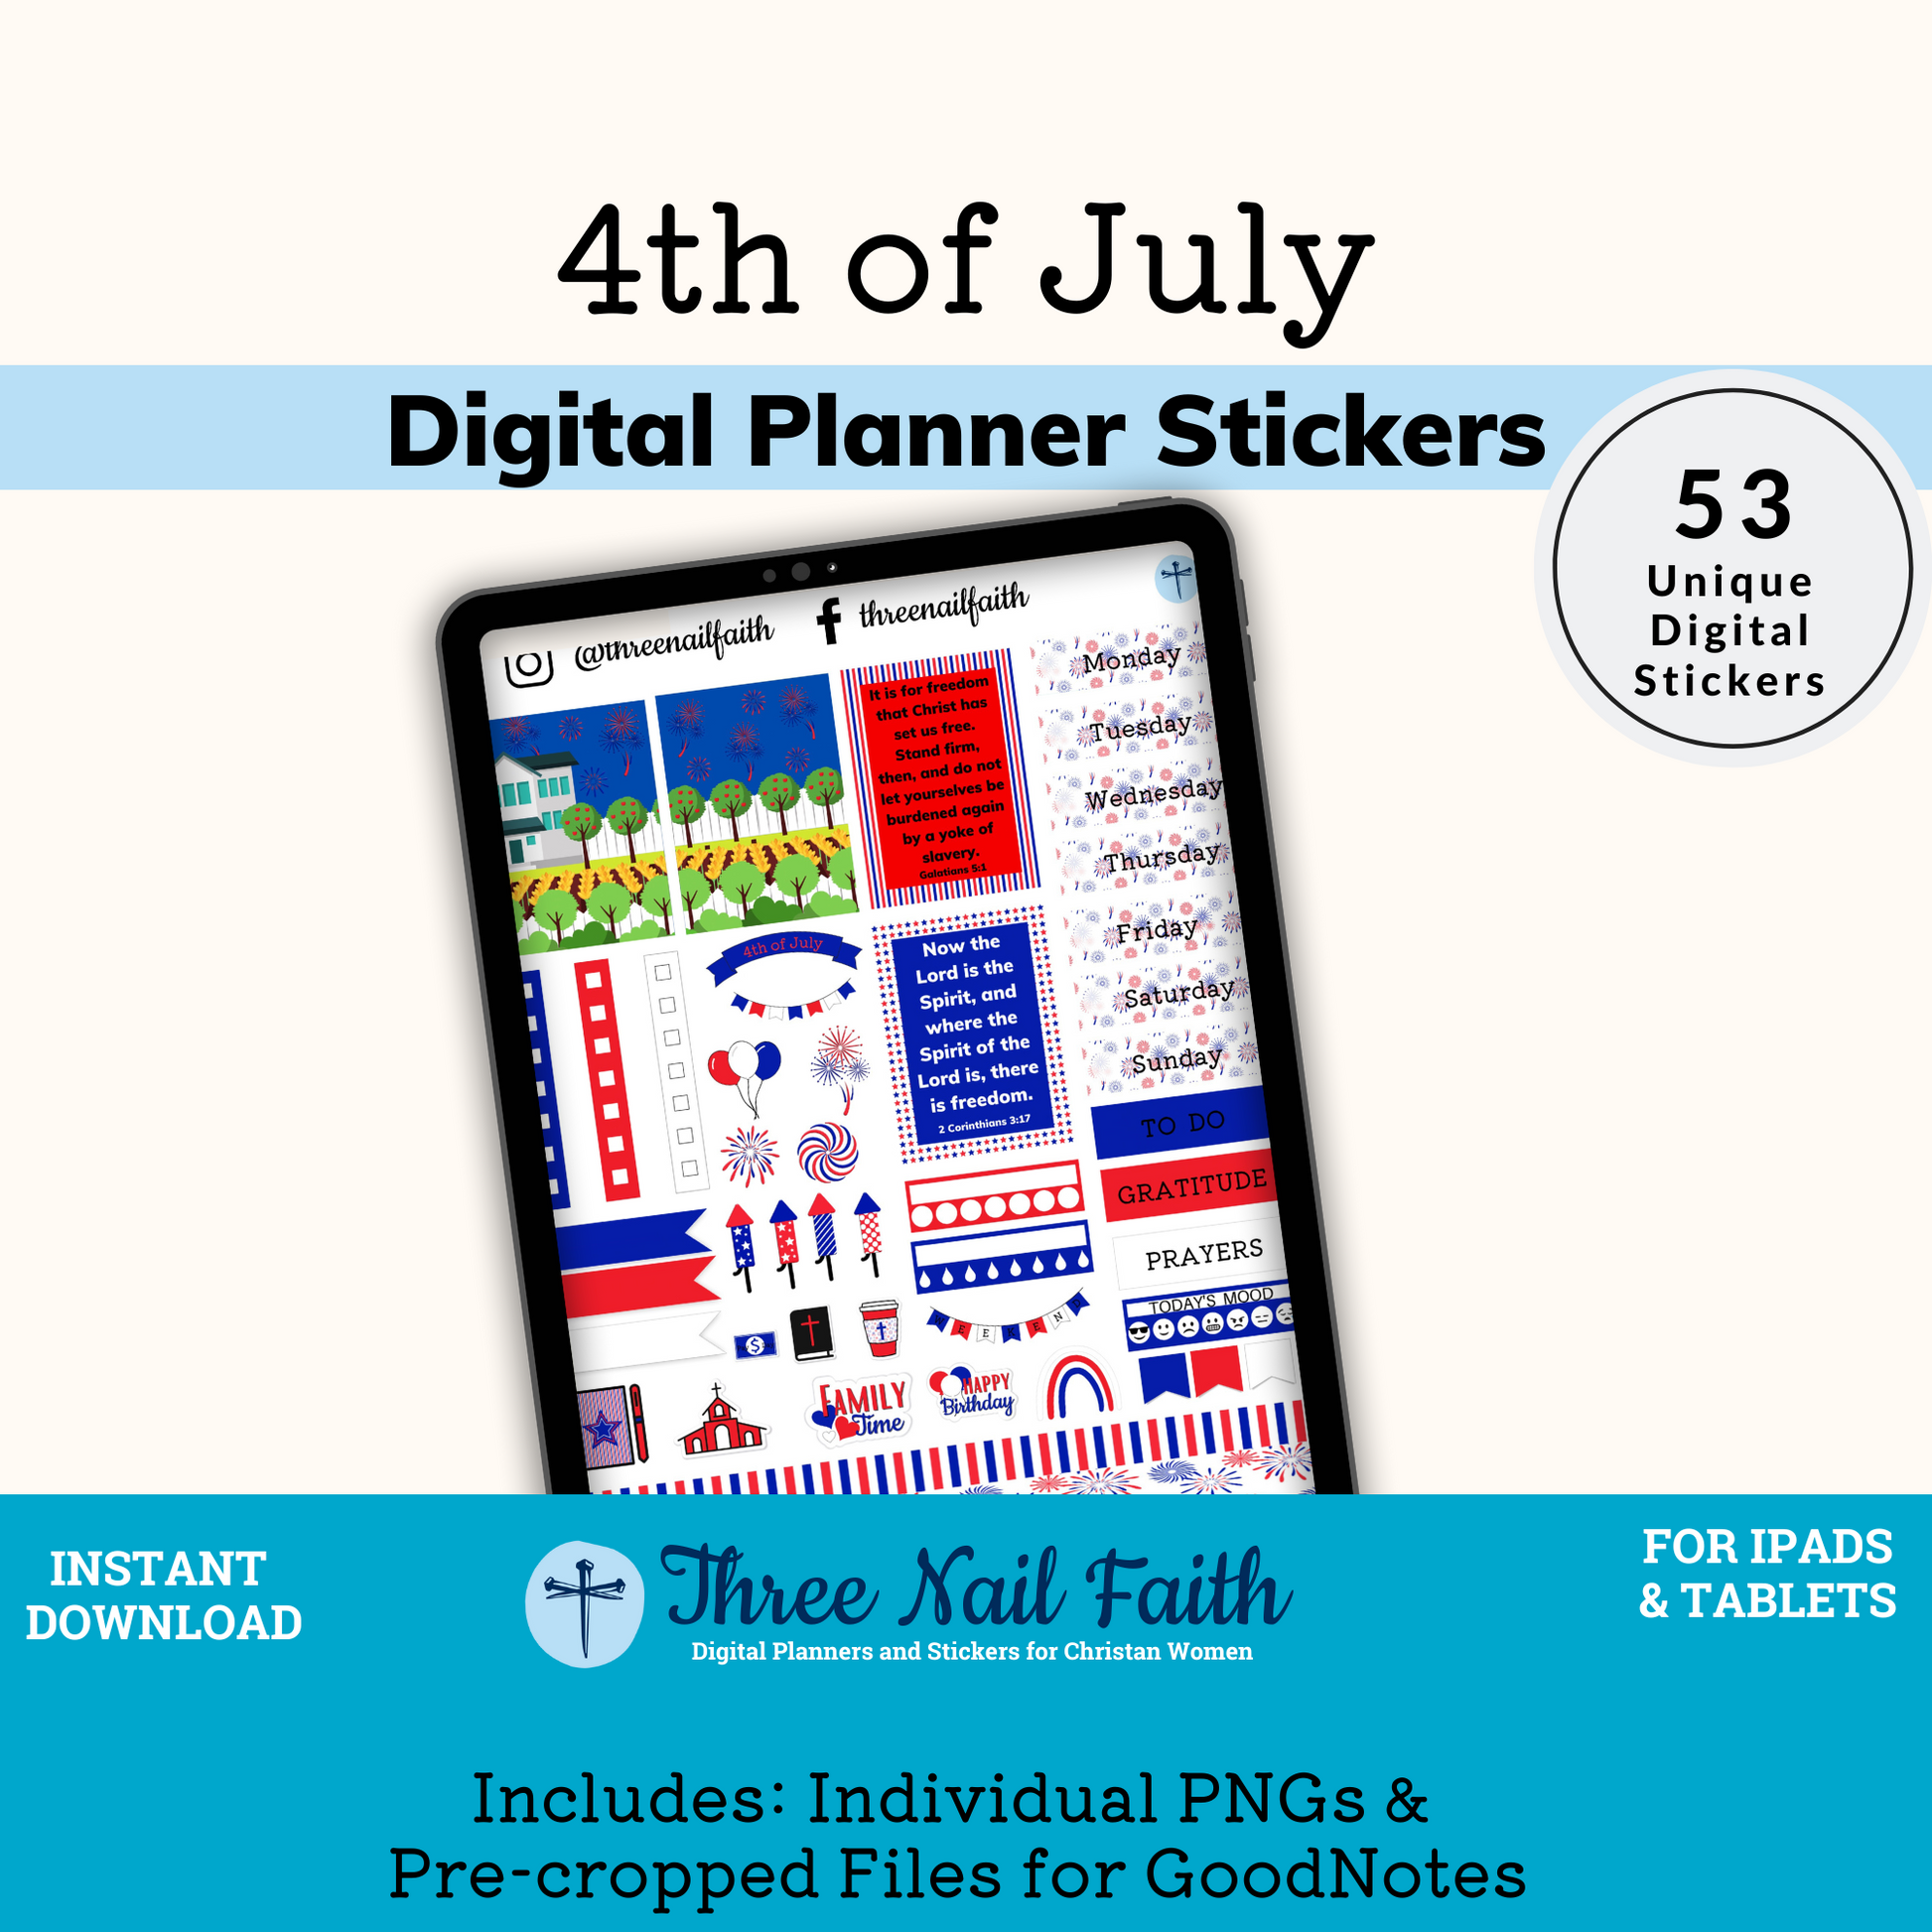 4th of July Digital sticker kit with 53 digital stickers